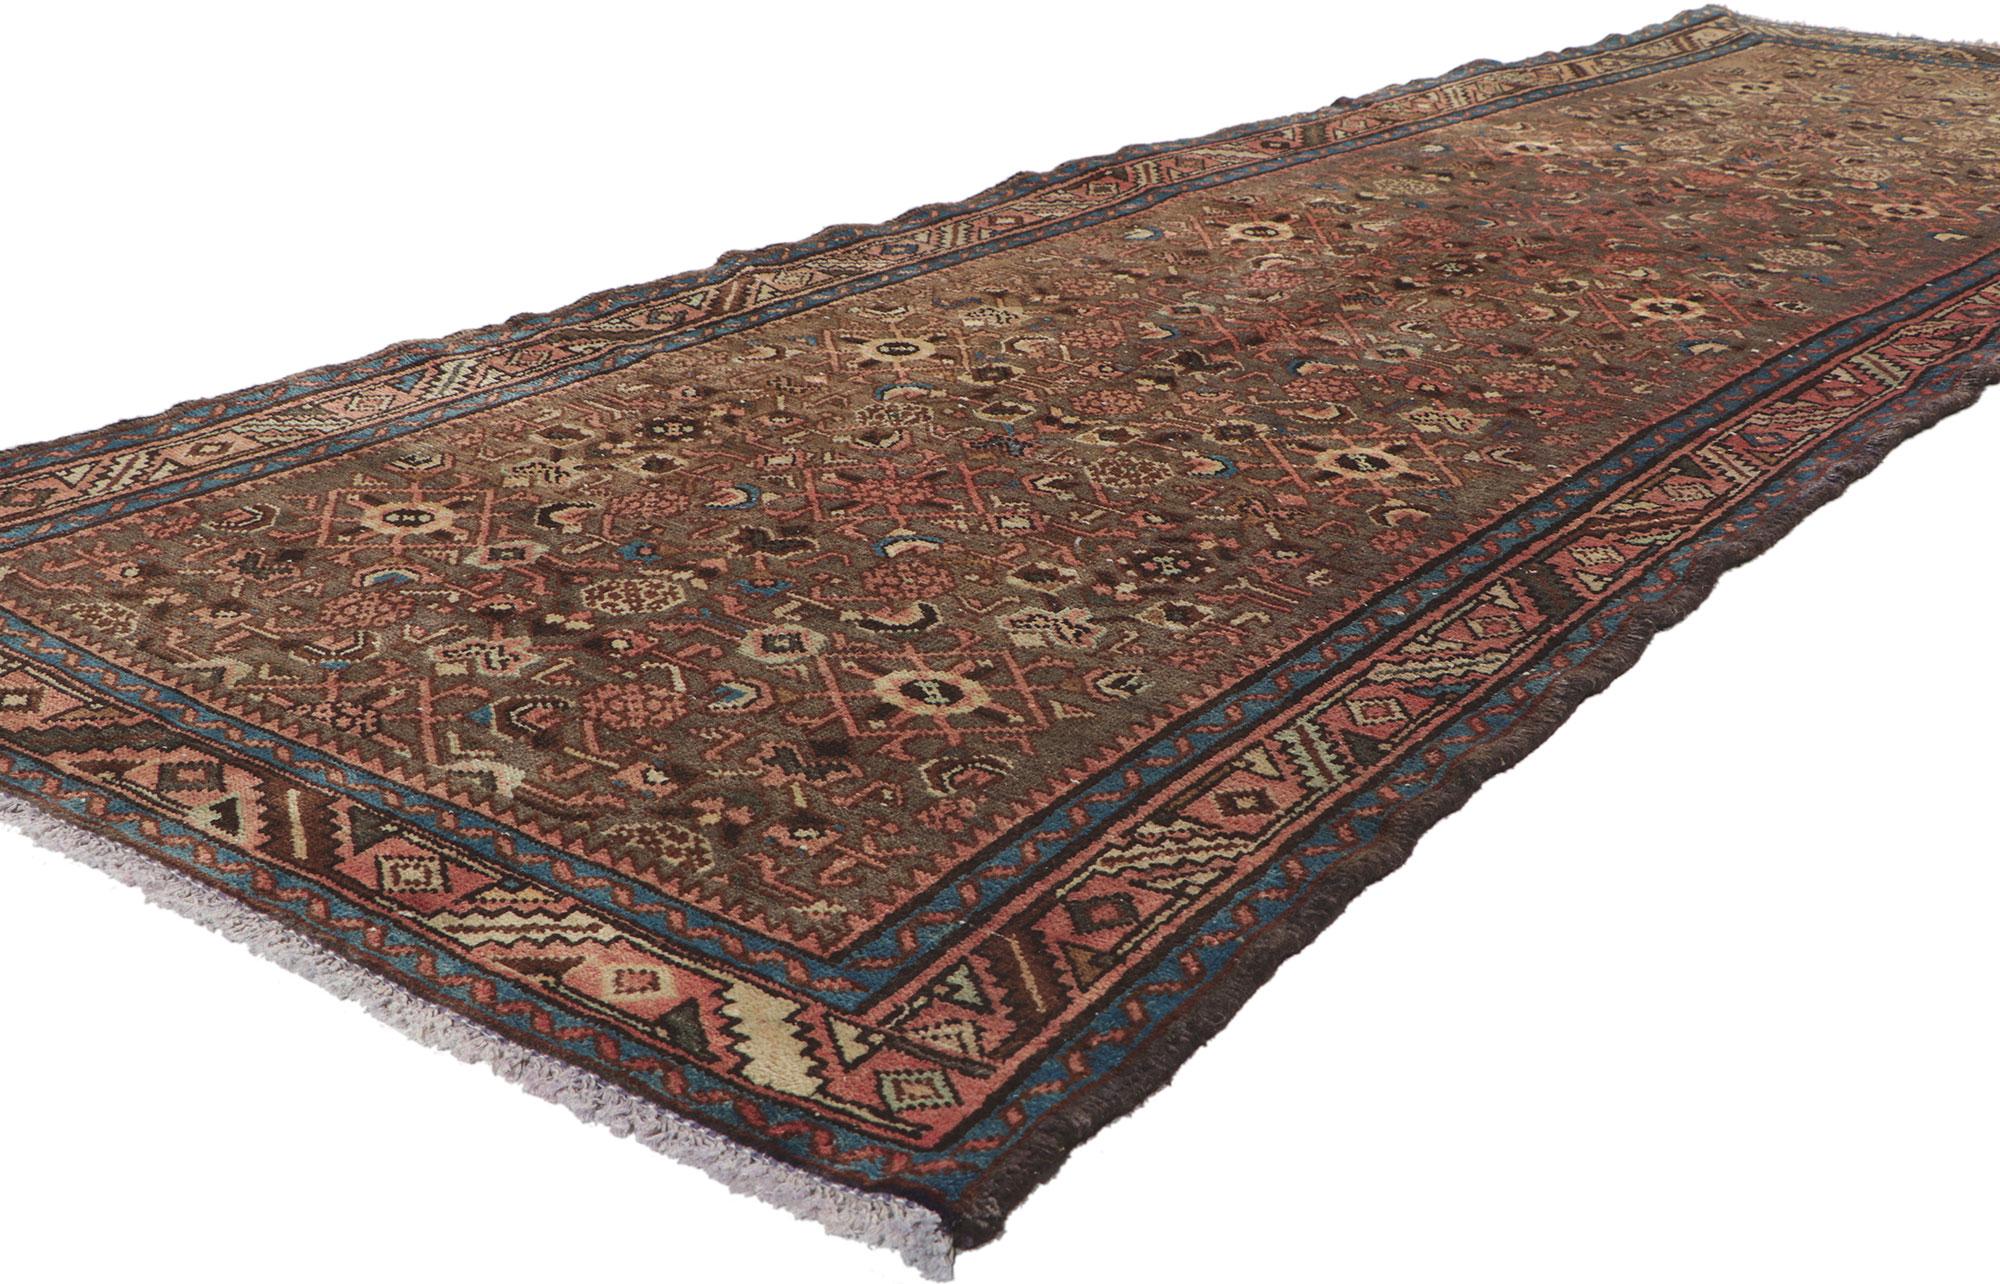 61162 Vintage Persian Hamadan Runner, 03'05 x 09'11. Emanating sophistication and rustic sensibility, this hand knotted wool vintage Persian Hamadan runner will take on a curated lived-in look that feels timeless while imparting a sense of warmth